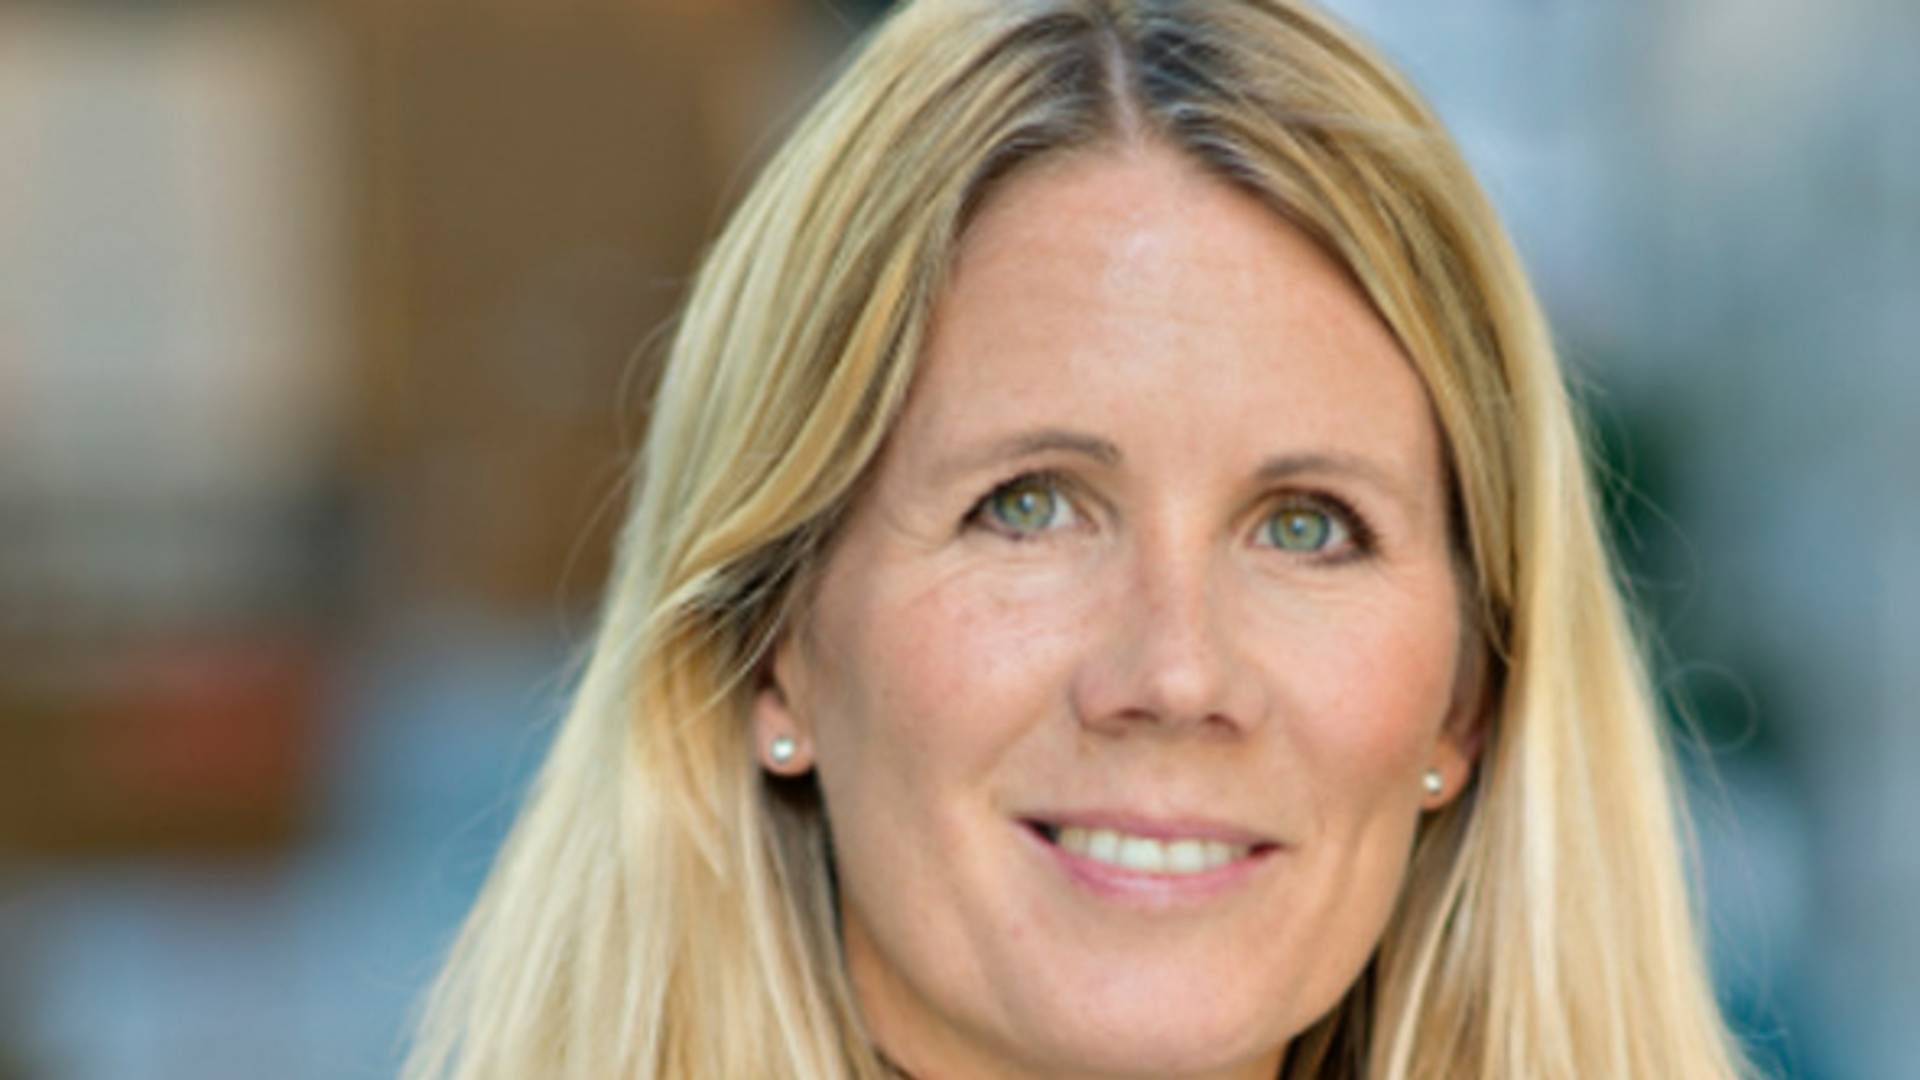 Nordea Co-head of Responsible Investment Katarina Hammar comments: "The company makes up a very small share of investments but we take this type of information seriously. While we are currently reviewing this investment, we have yet to make a decision. | Photo: Nordea / PR